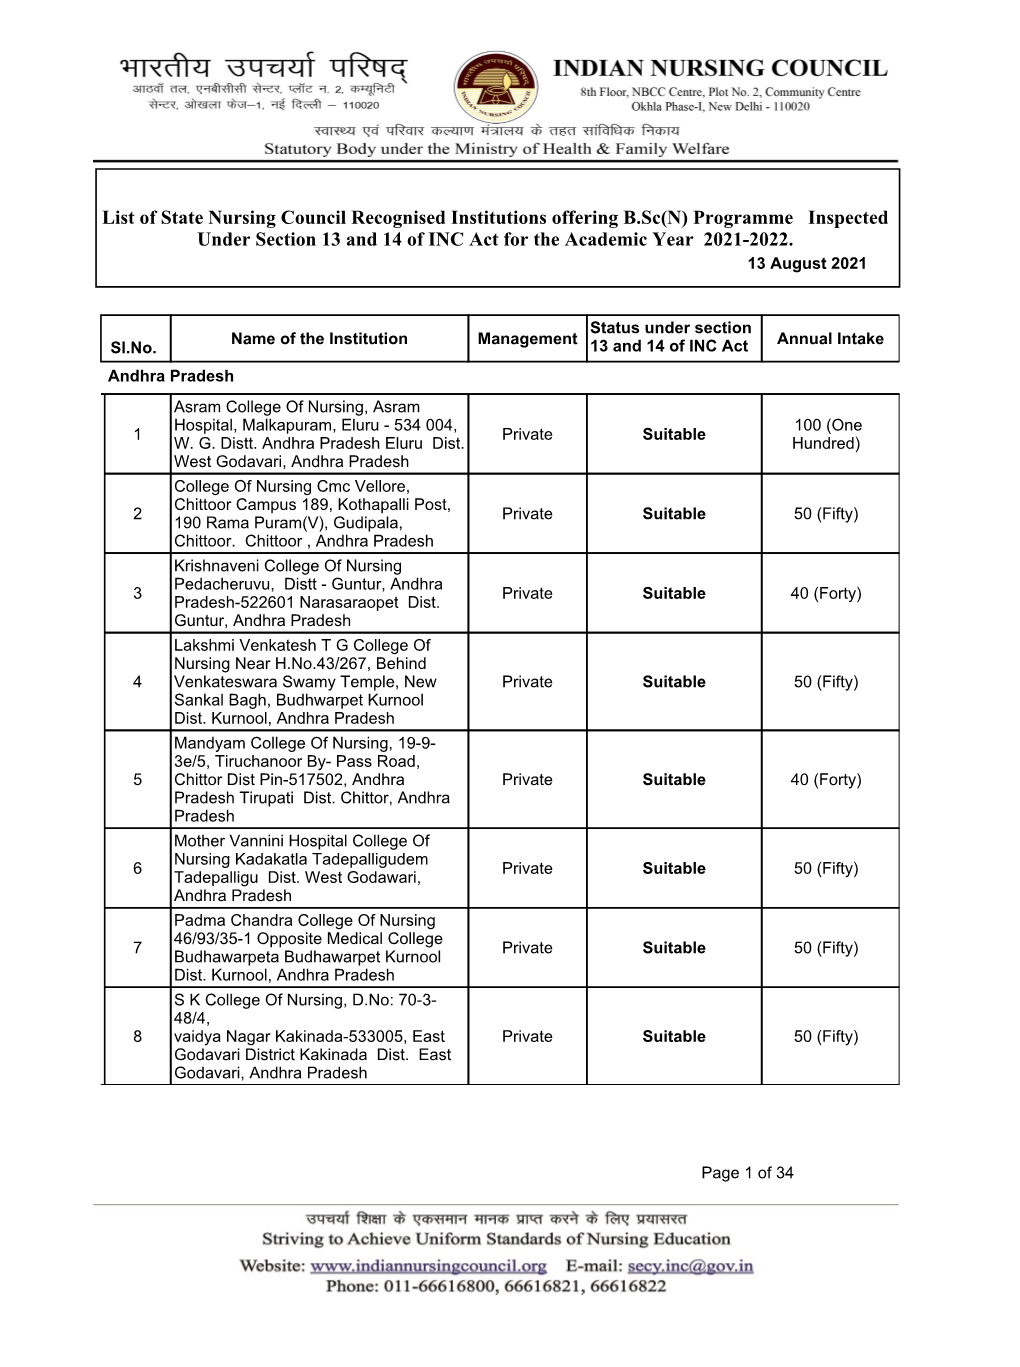 List of B.Sc Nursing Institute for the Year 2021-22 (13 August 2021 )